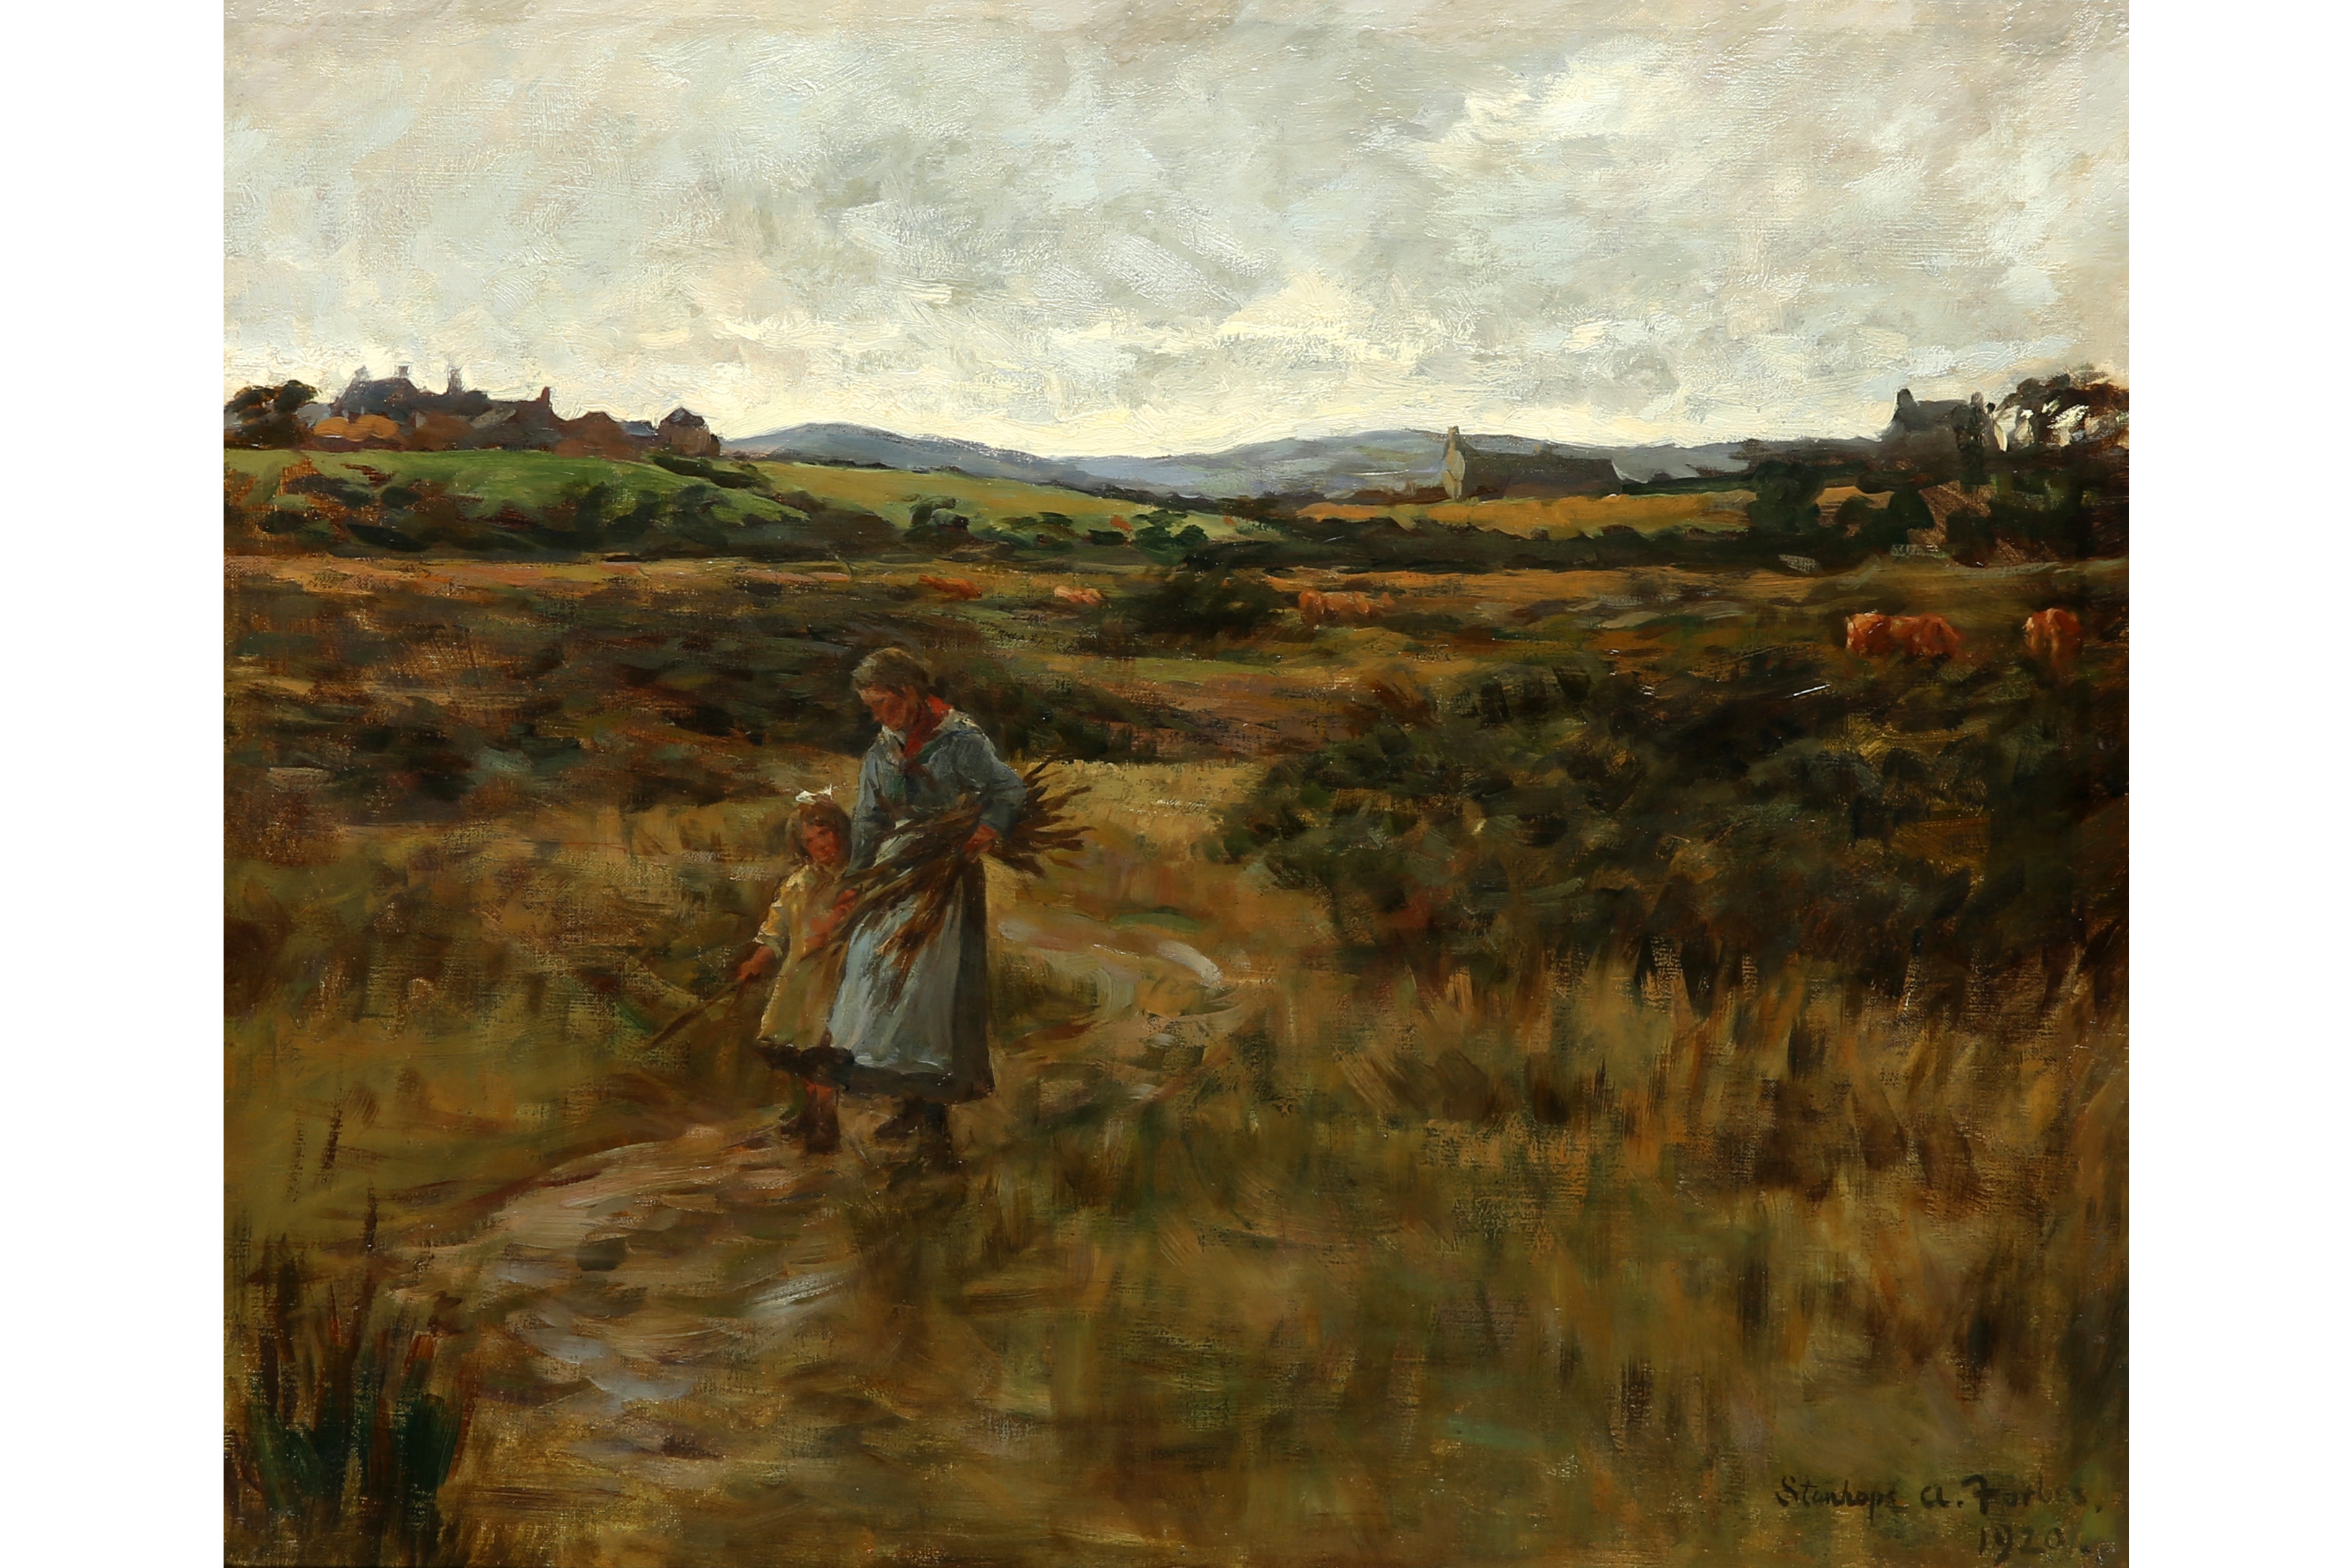 Chyenhall Moor by Stanhope Alexander Forbes, 1920